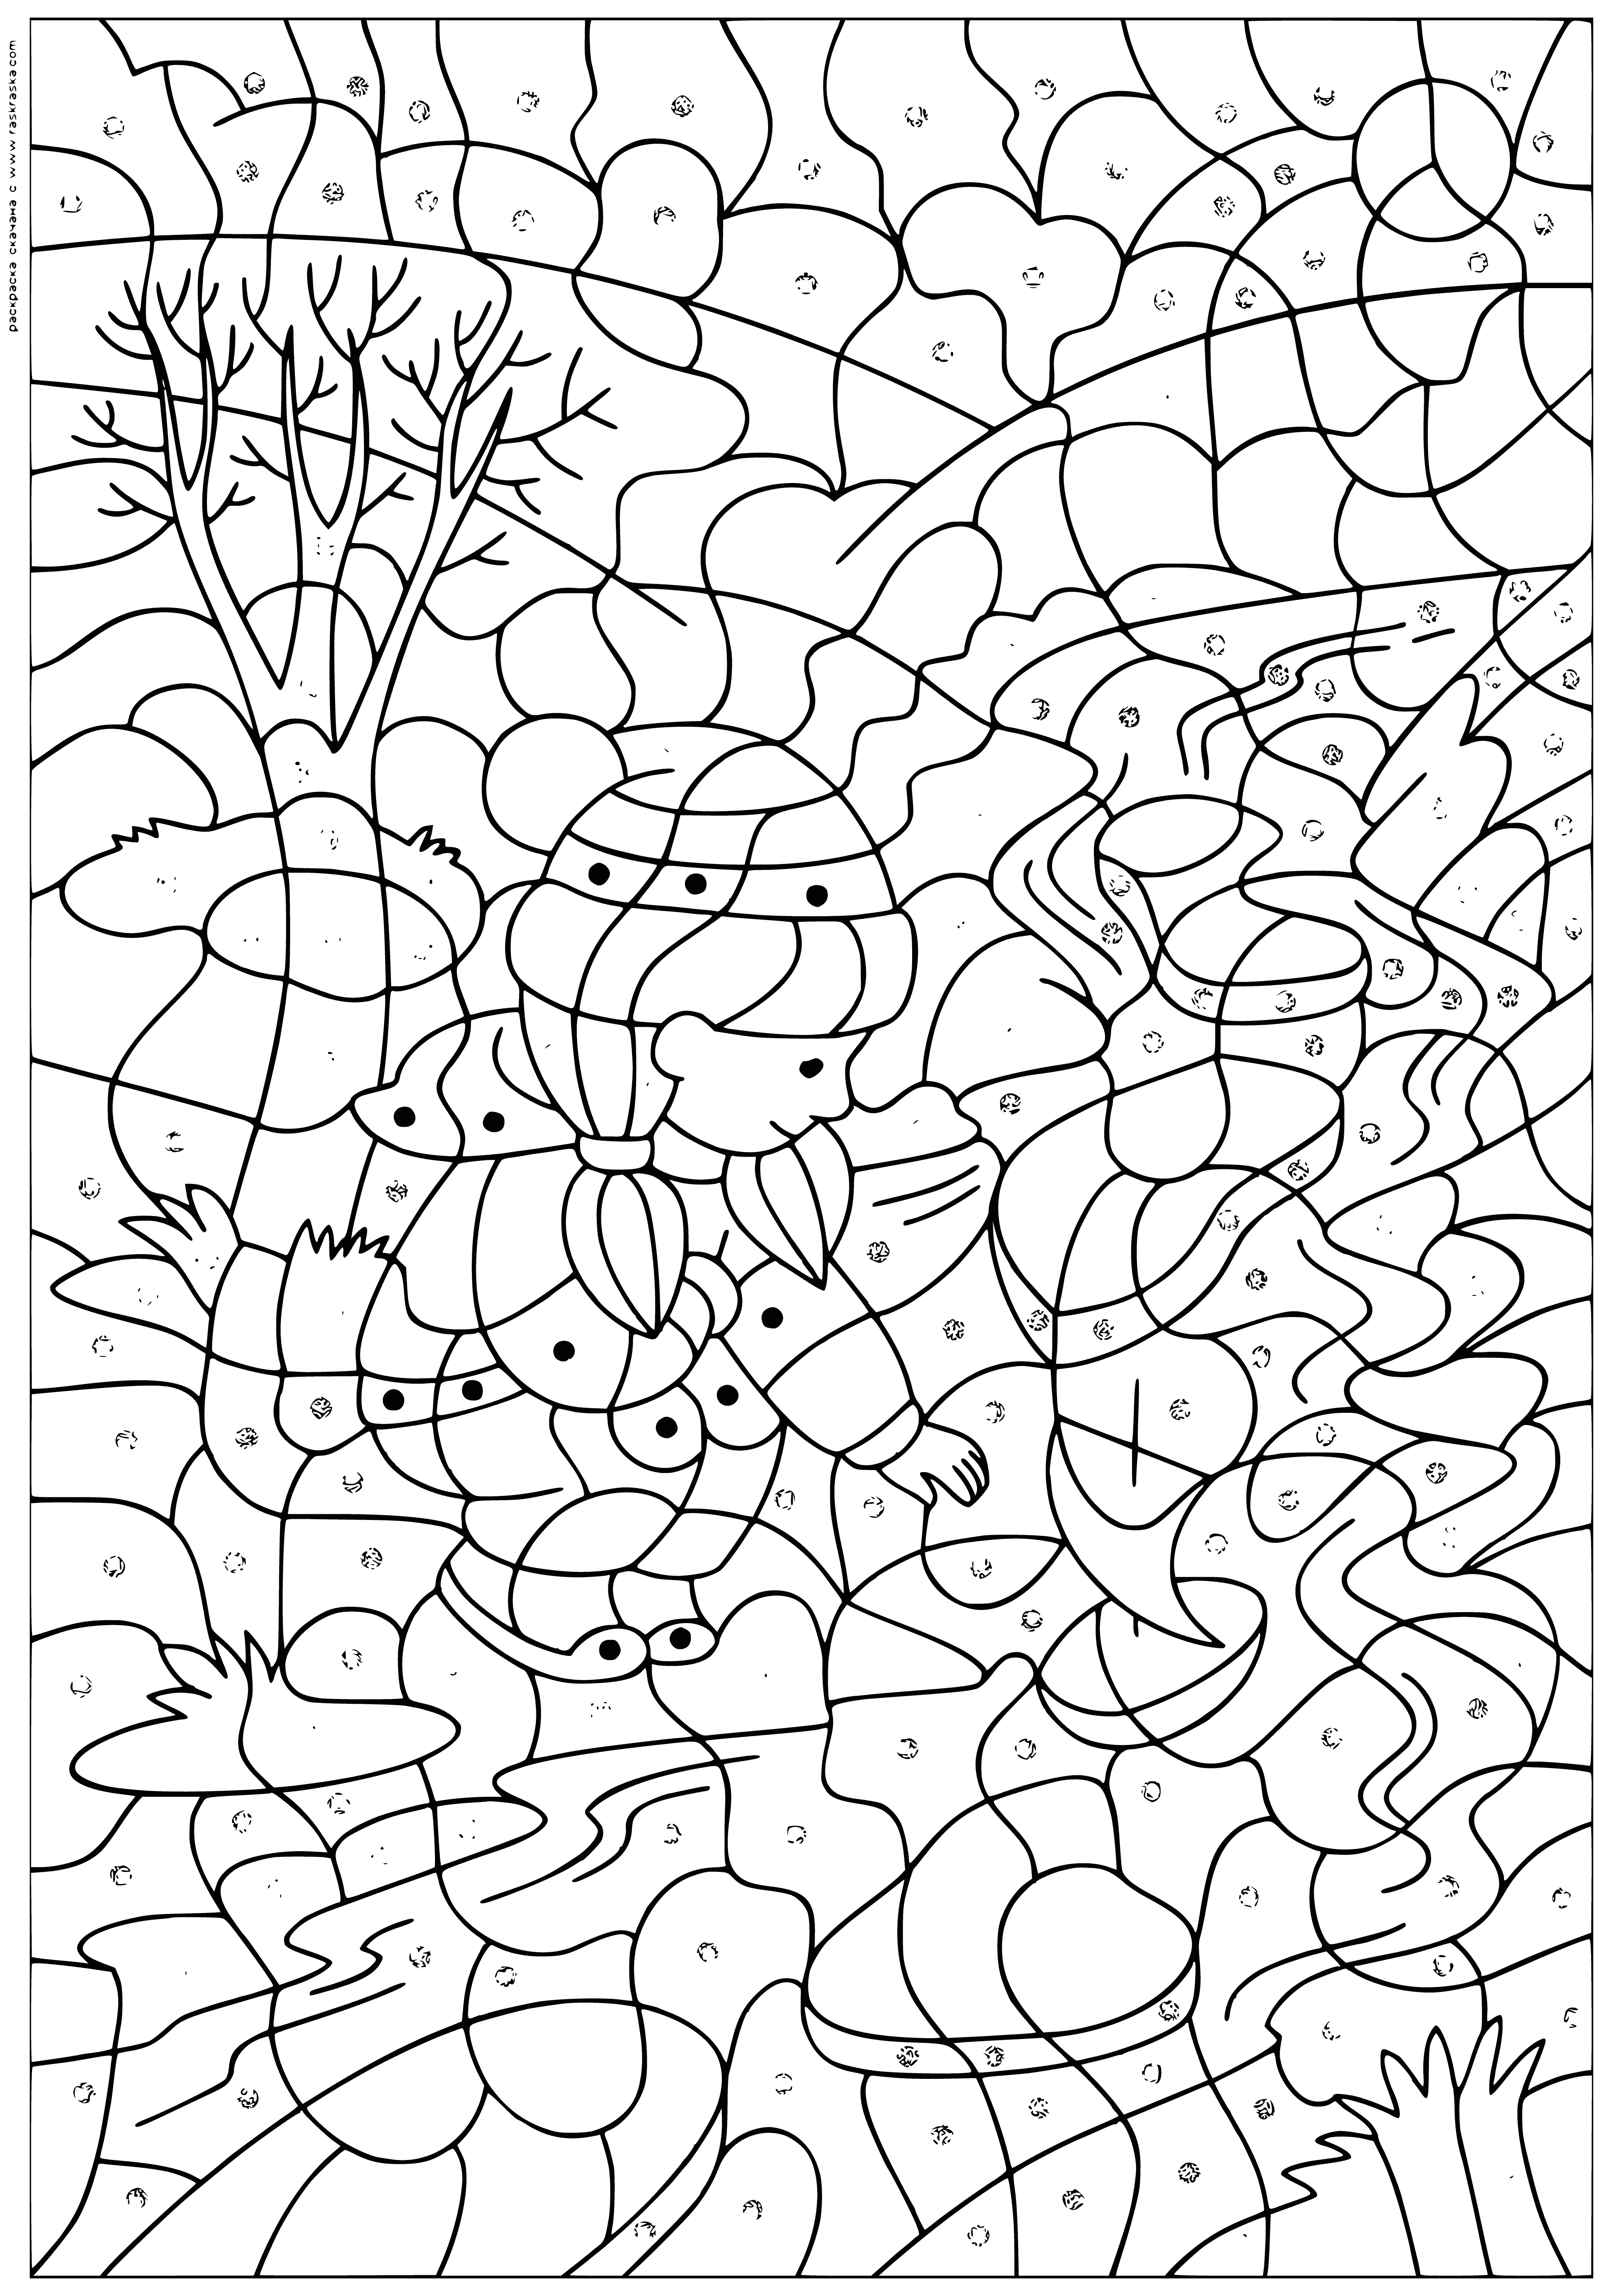 coloring page: Four boats of different colors in the Spring boats coloring page - blue & white, yellow & black, green & white, red & black.